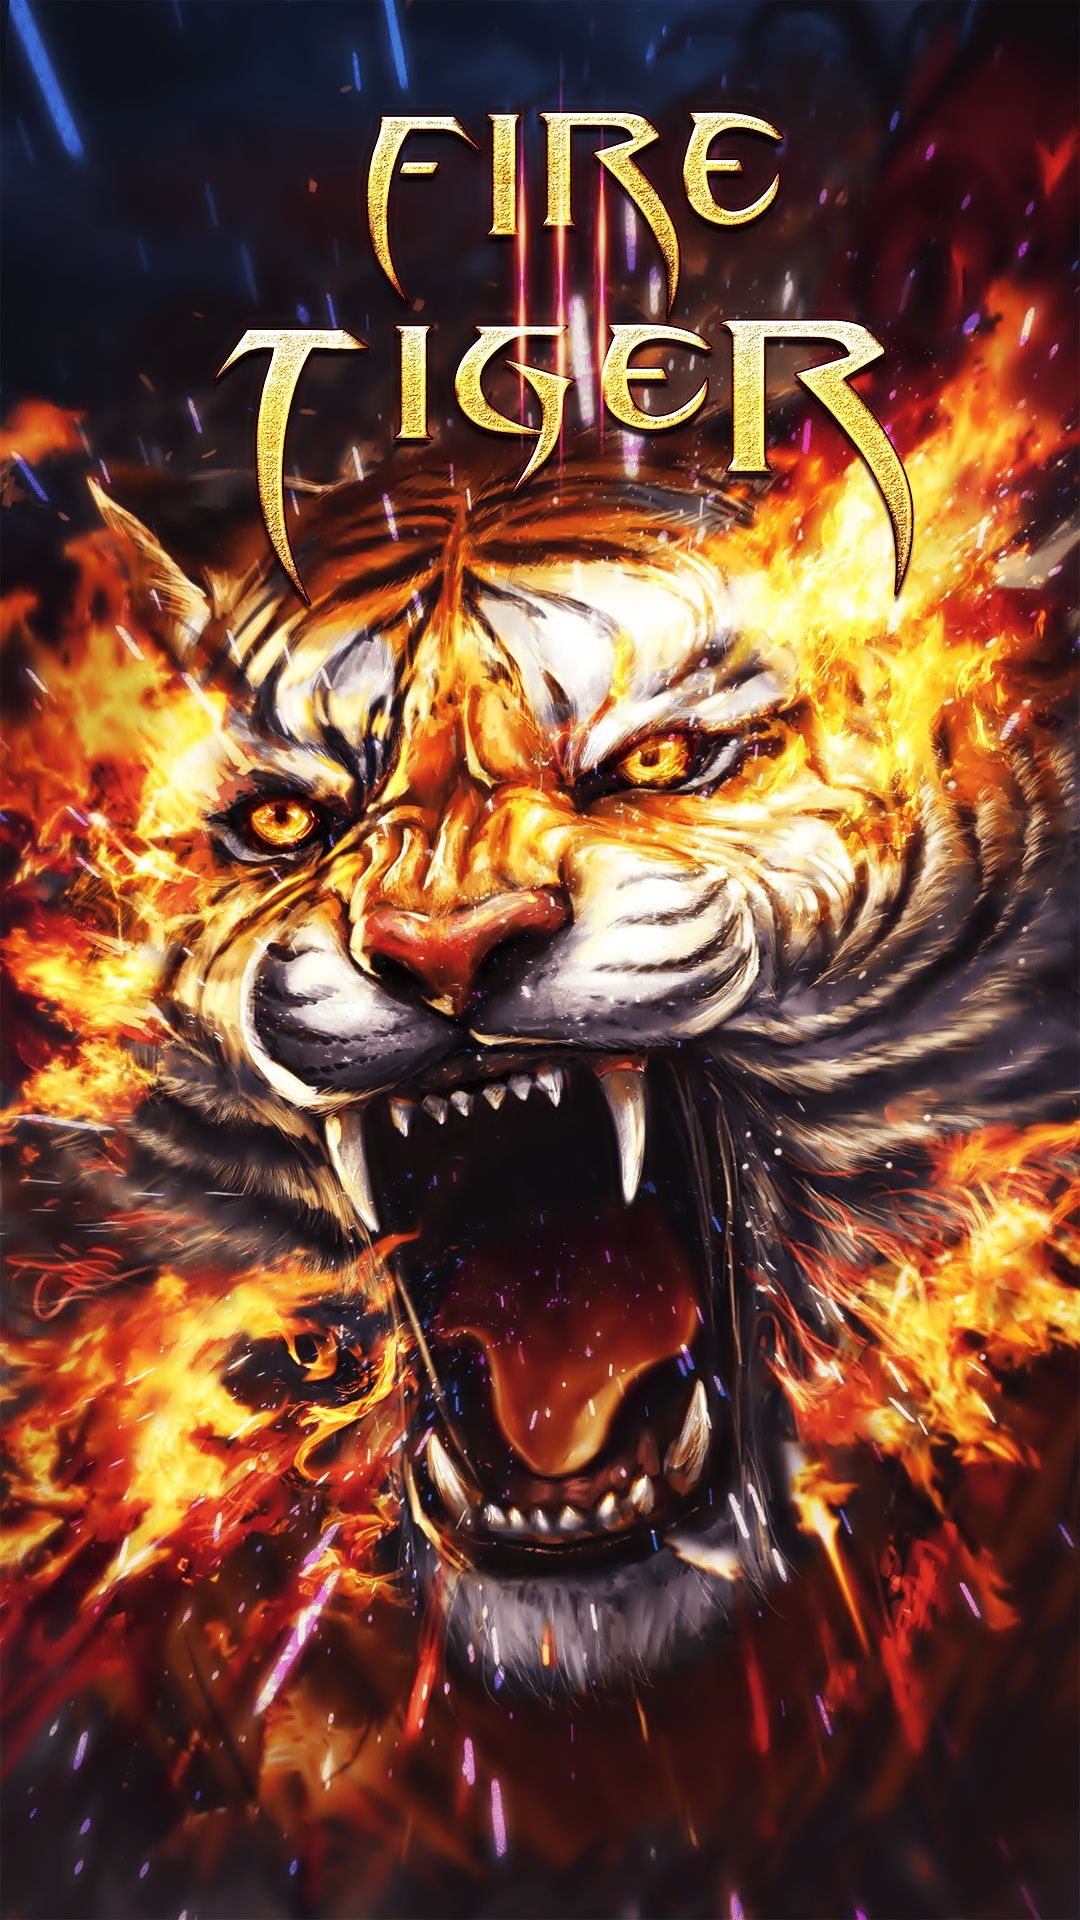 fire tiger wallpaper,movie,fiction,poster,illustration,fictional character